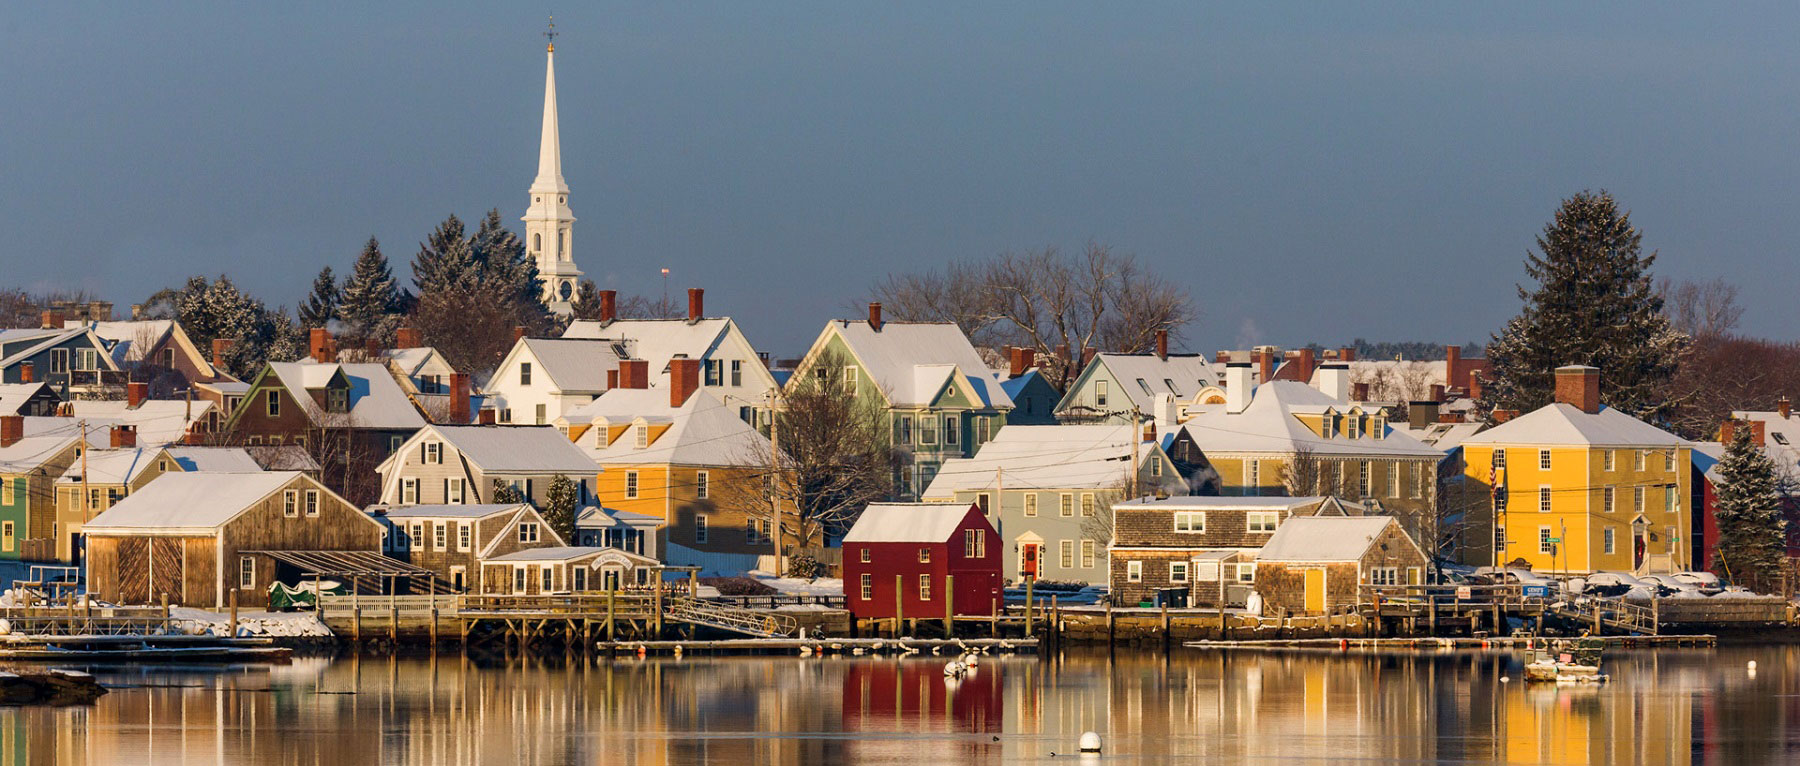 Waterfront of Portsmouth, NH in Winter - Photo Credit NH Dept of Travel & Tourism Development